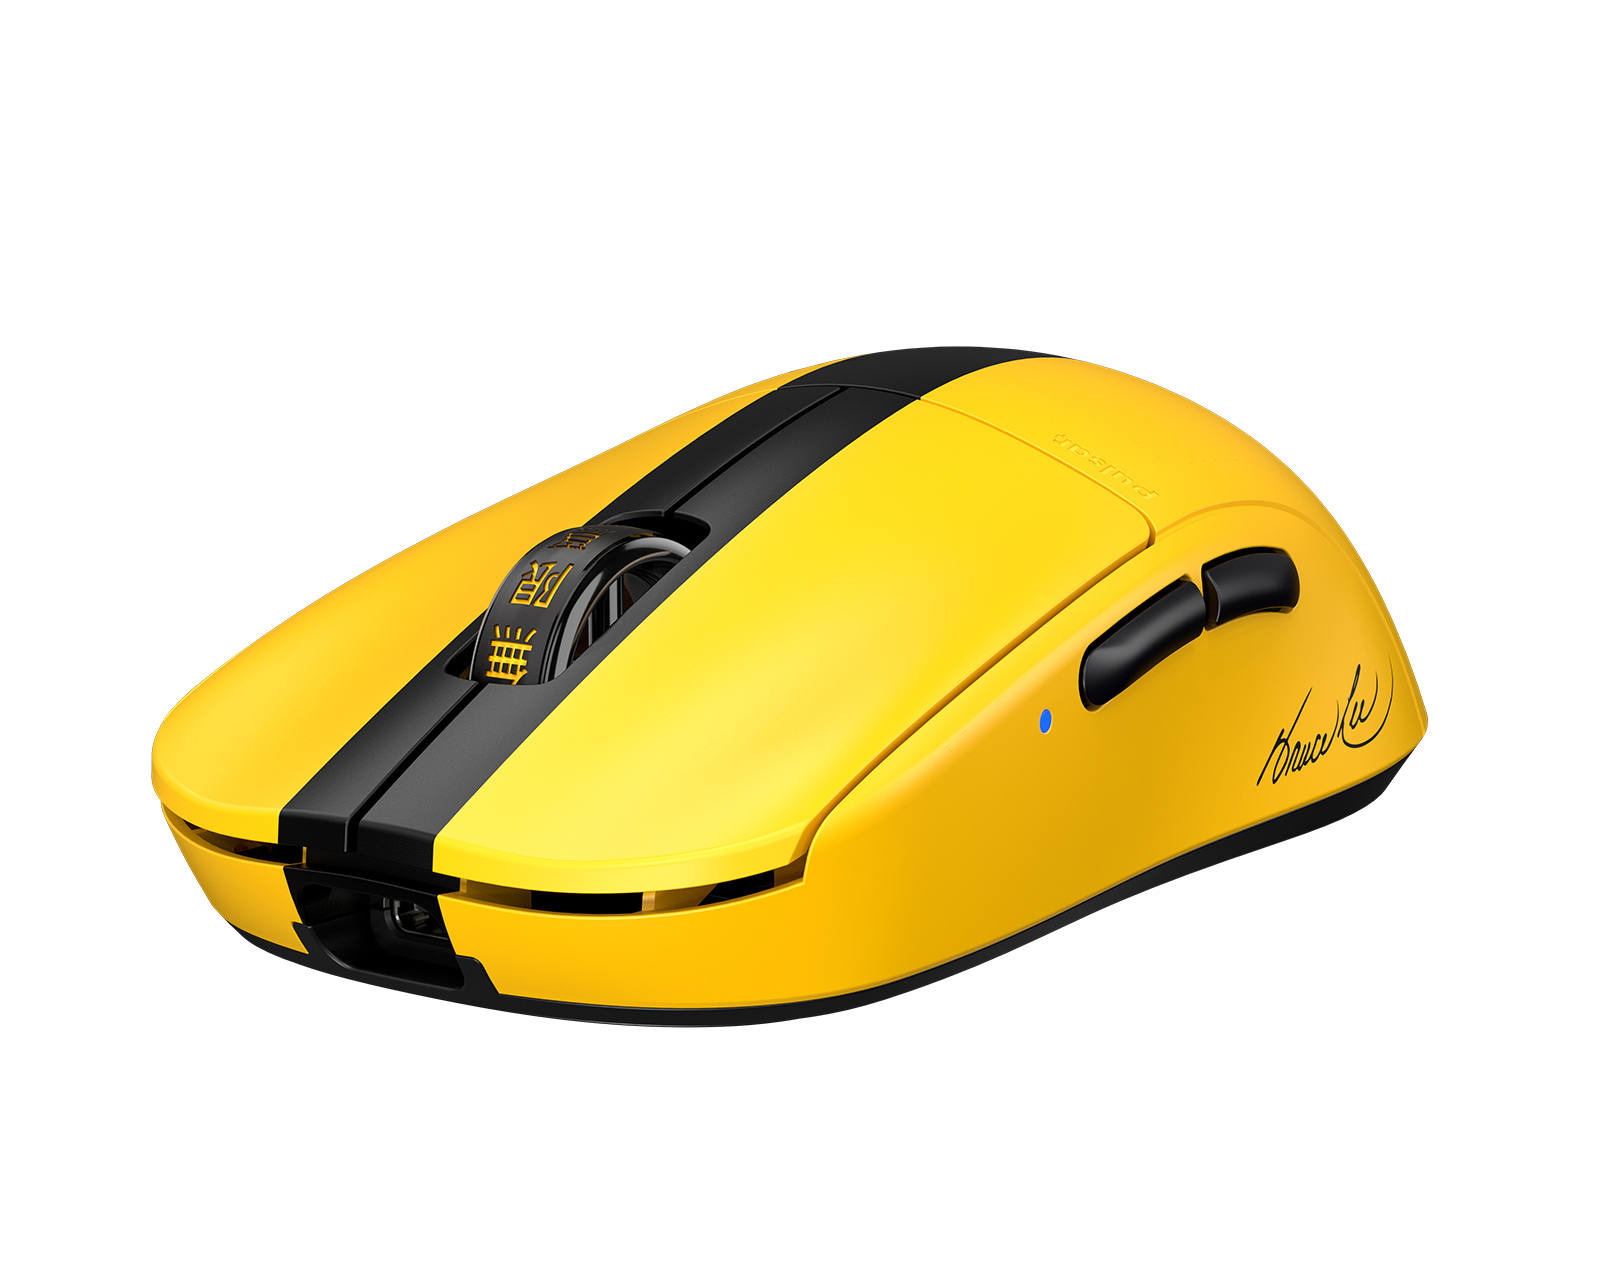 Pulsar X2 Wireless Gaming Mouse - Bruce Lee Limited Edition